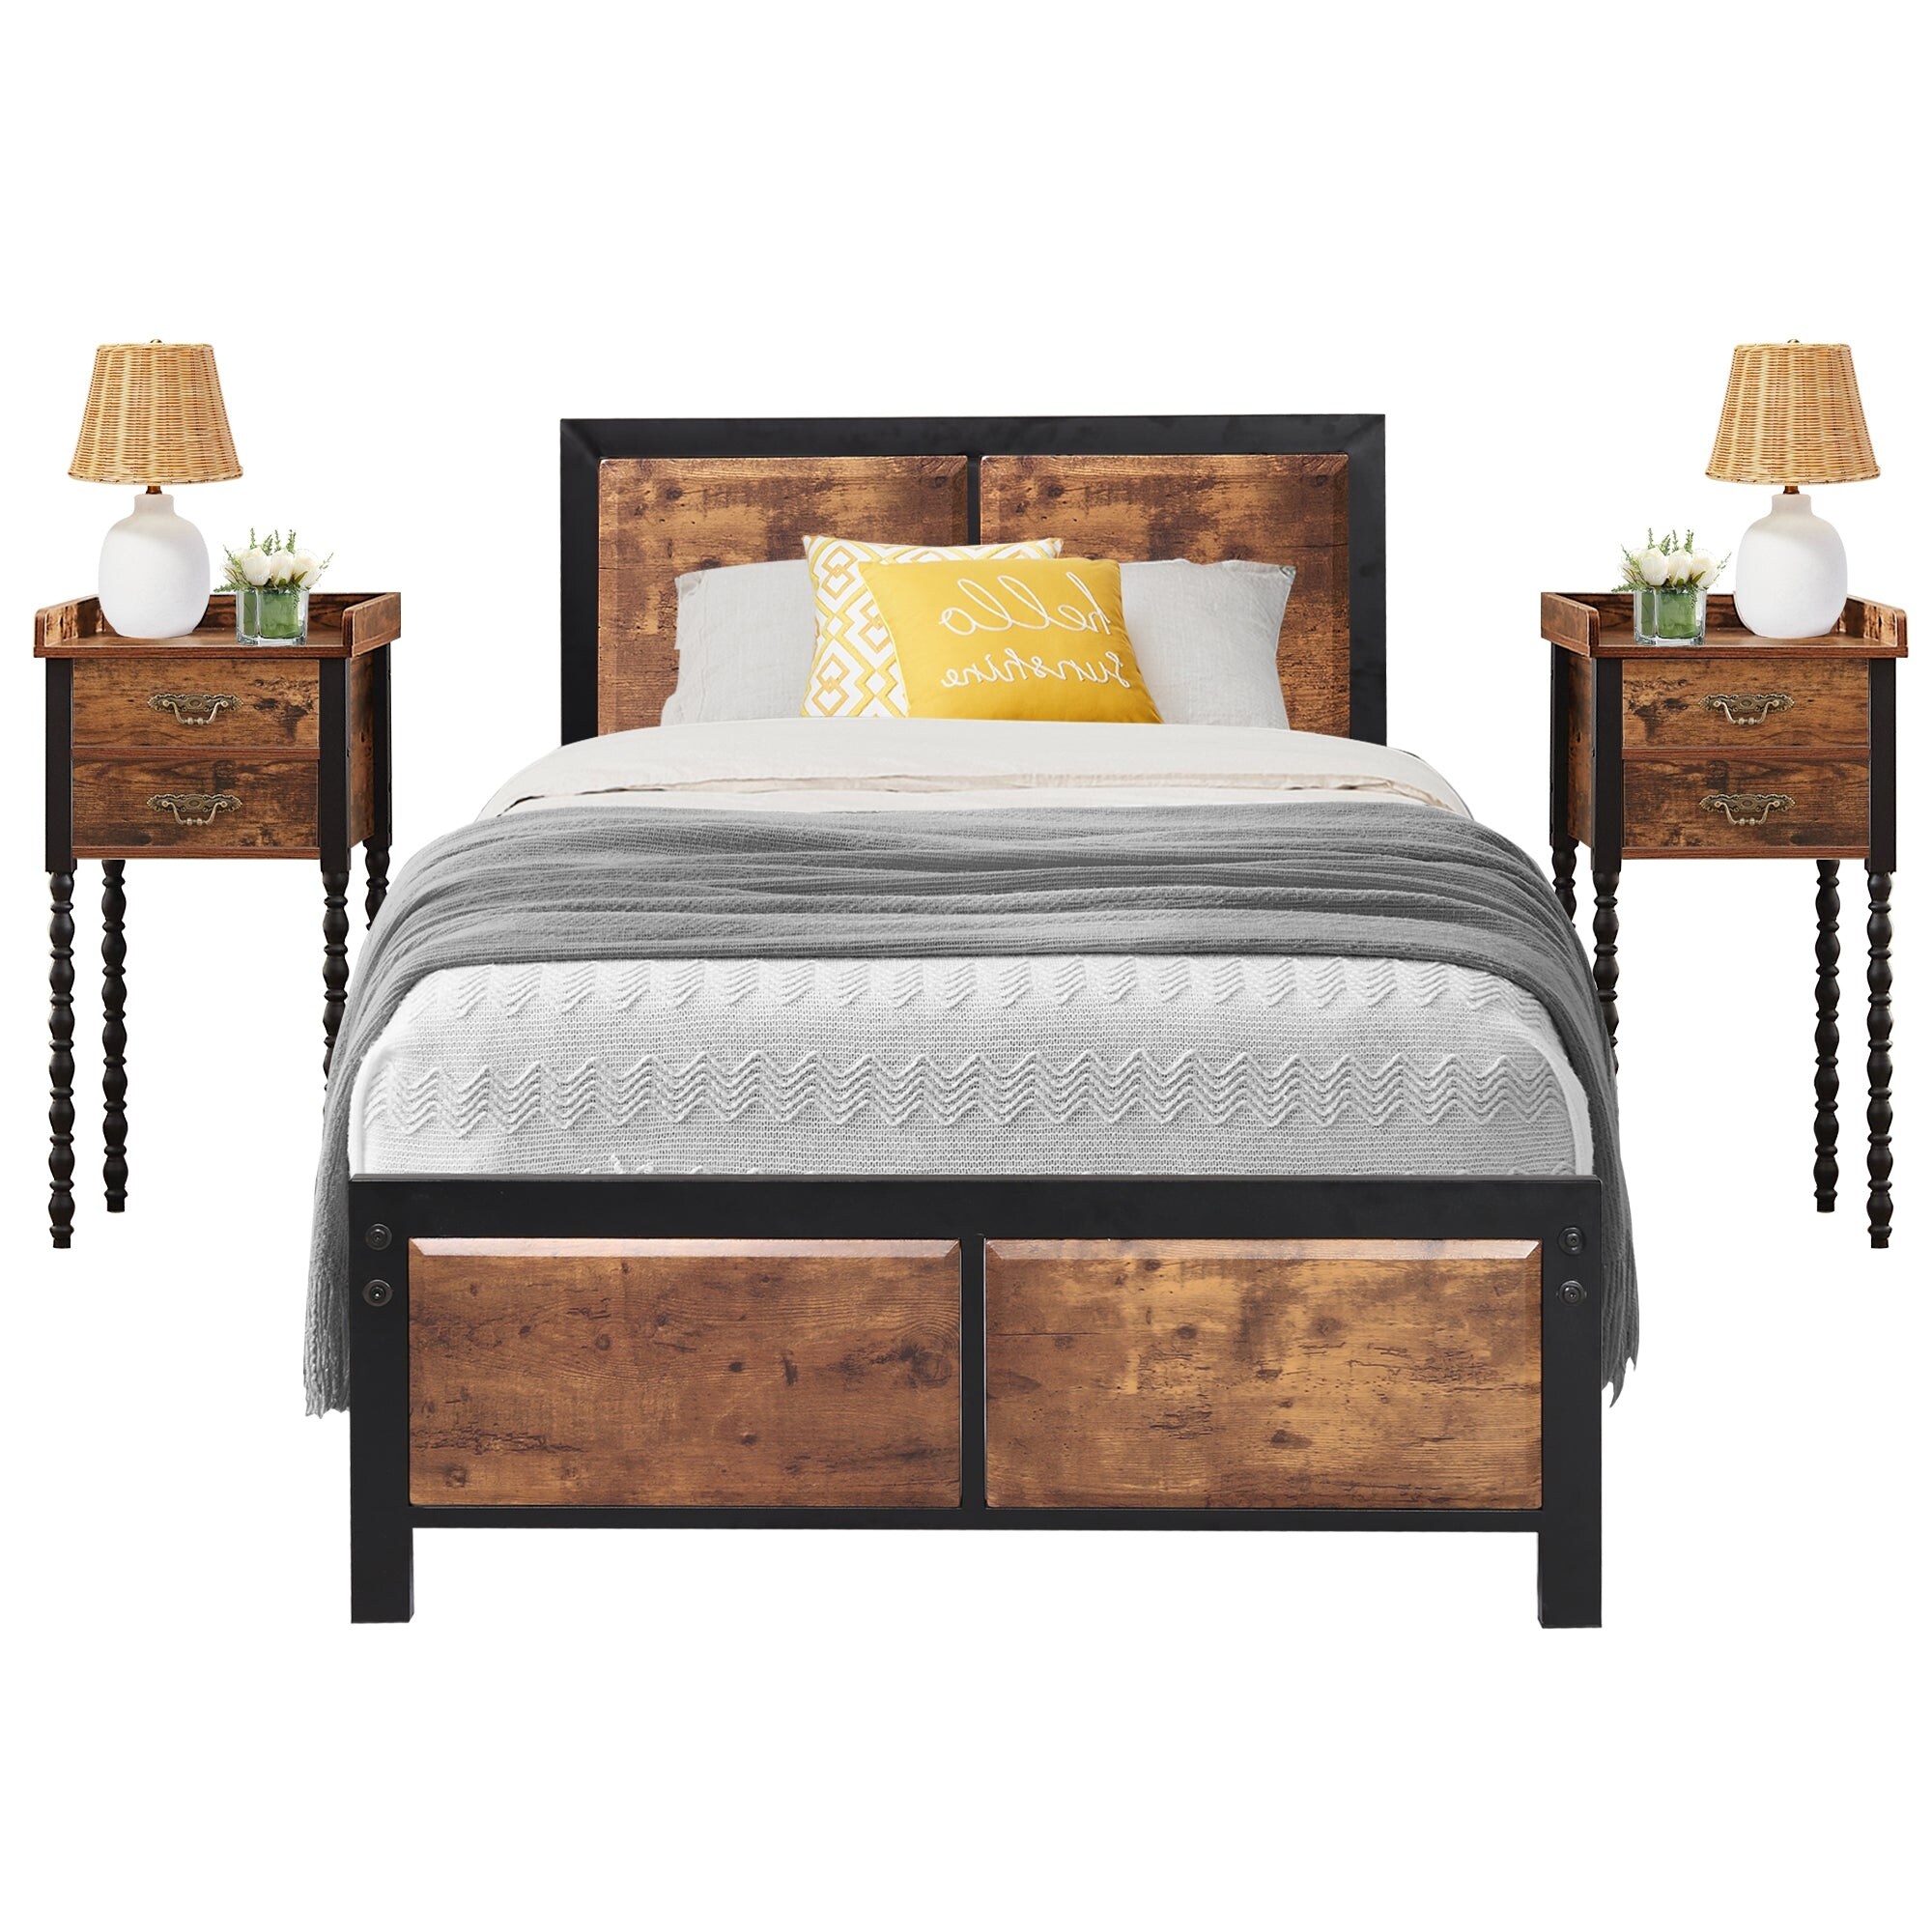 Rustic Transitional Look Solid wood 3pc Queen Size Bed 2x Nightstands  Natural Tone Low Profile Bed w/ Plank Panel Headboard 